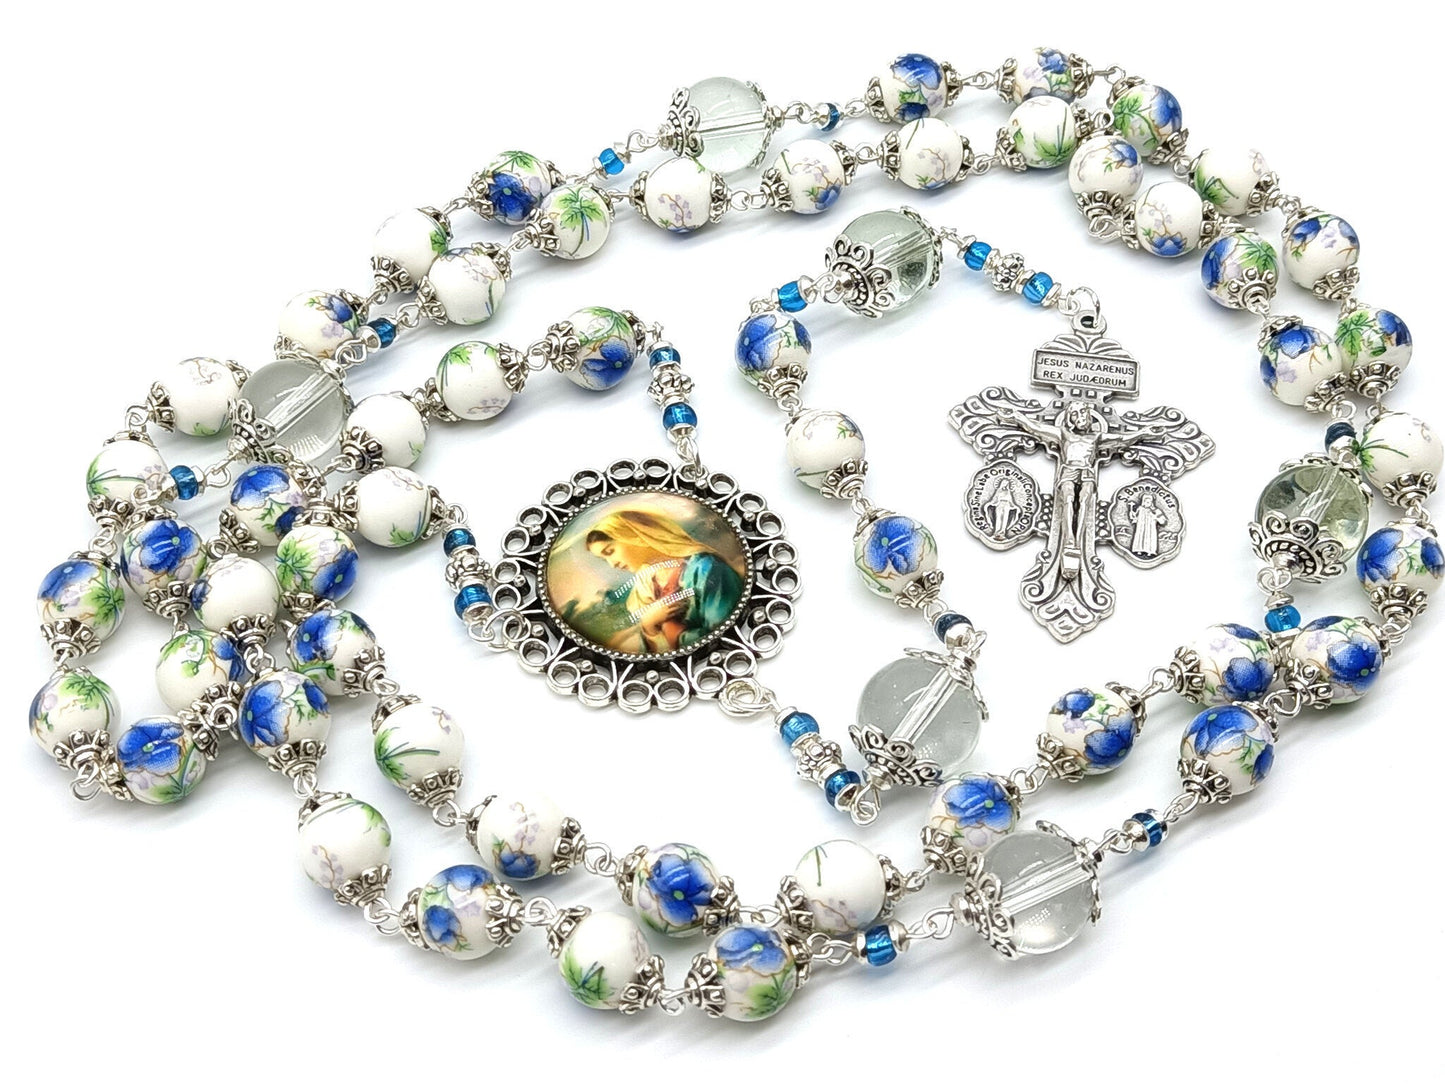 Porcelain unique rosary beads with silver pardon crucifix, Virgin Mary centre medal and glass pater beads.